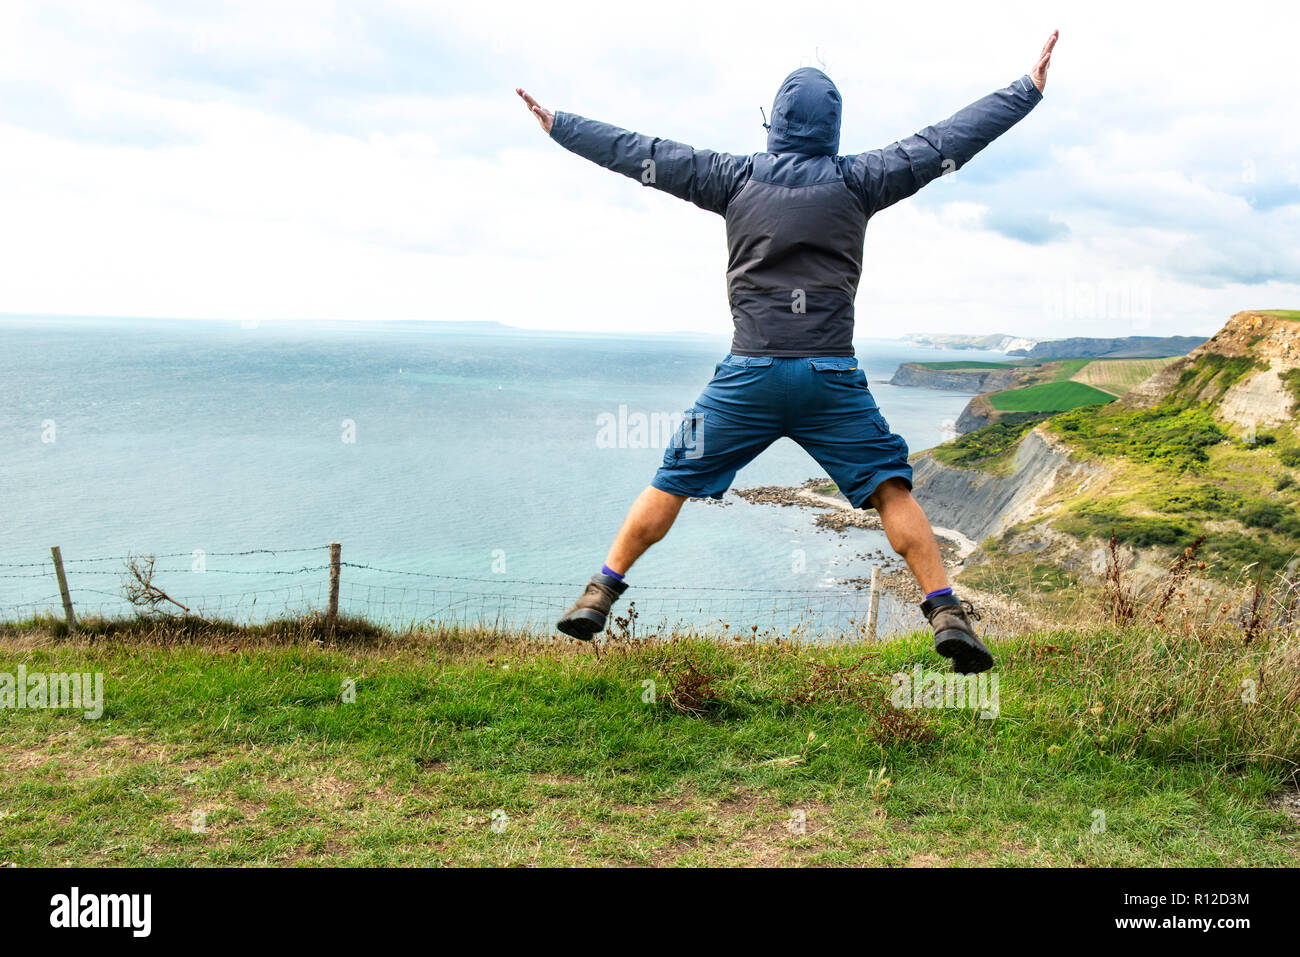 Man jumping on clifftop by sea, Bournemouth, UK Stock Photo